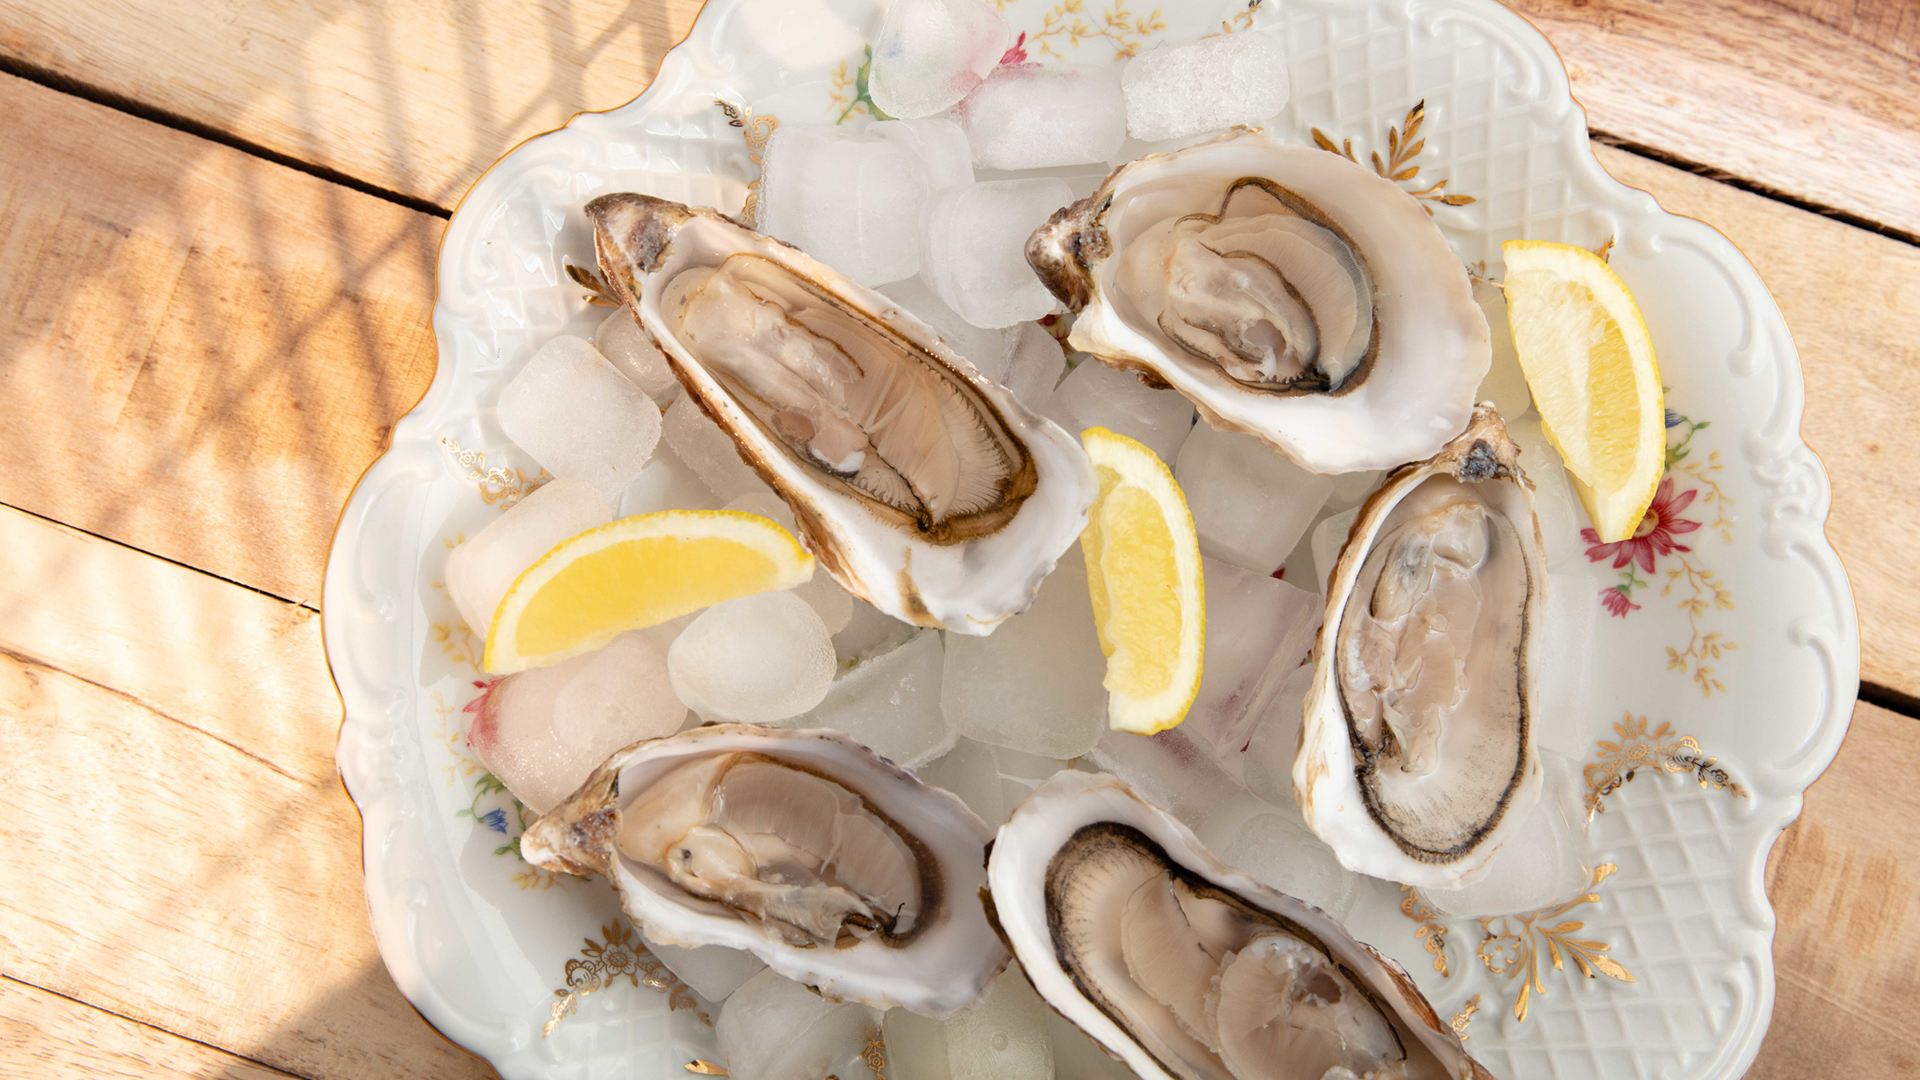 Oysters and lemon wedges on a patterned plate